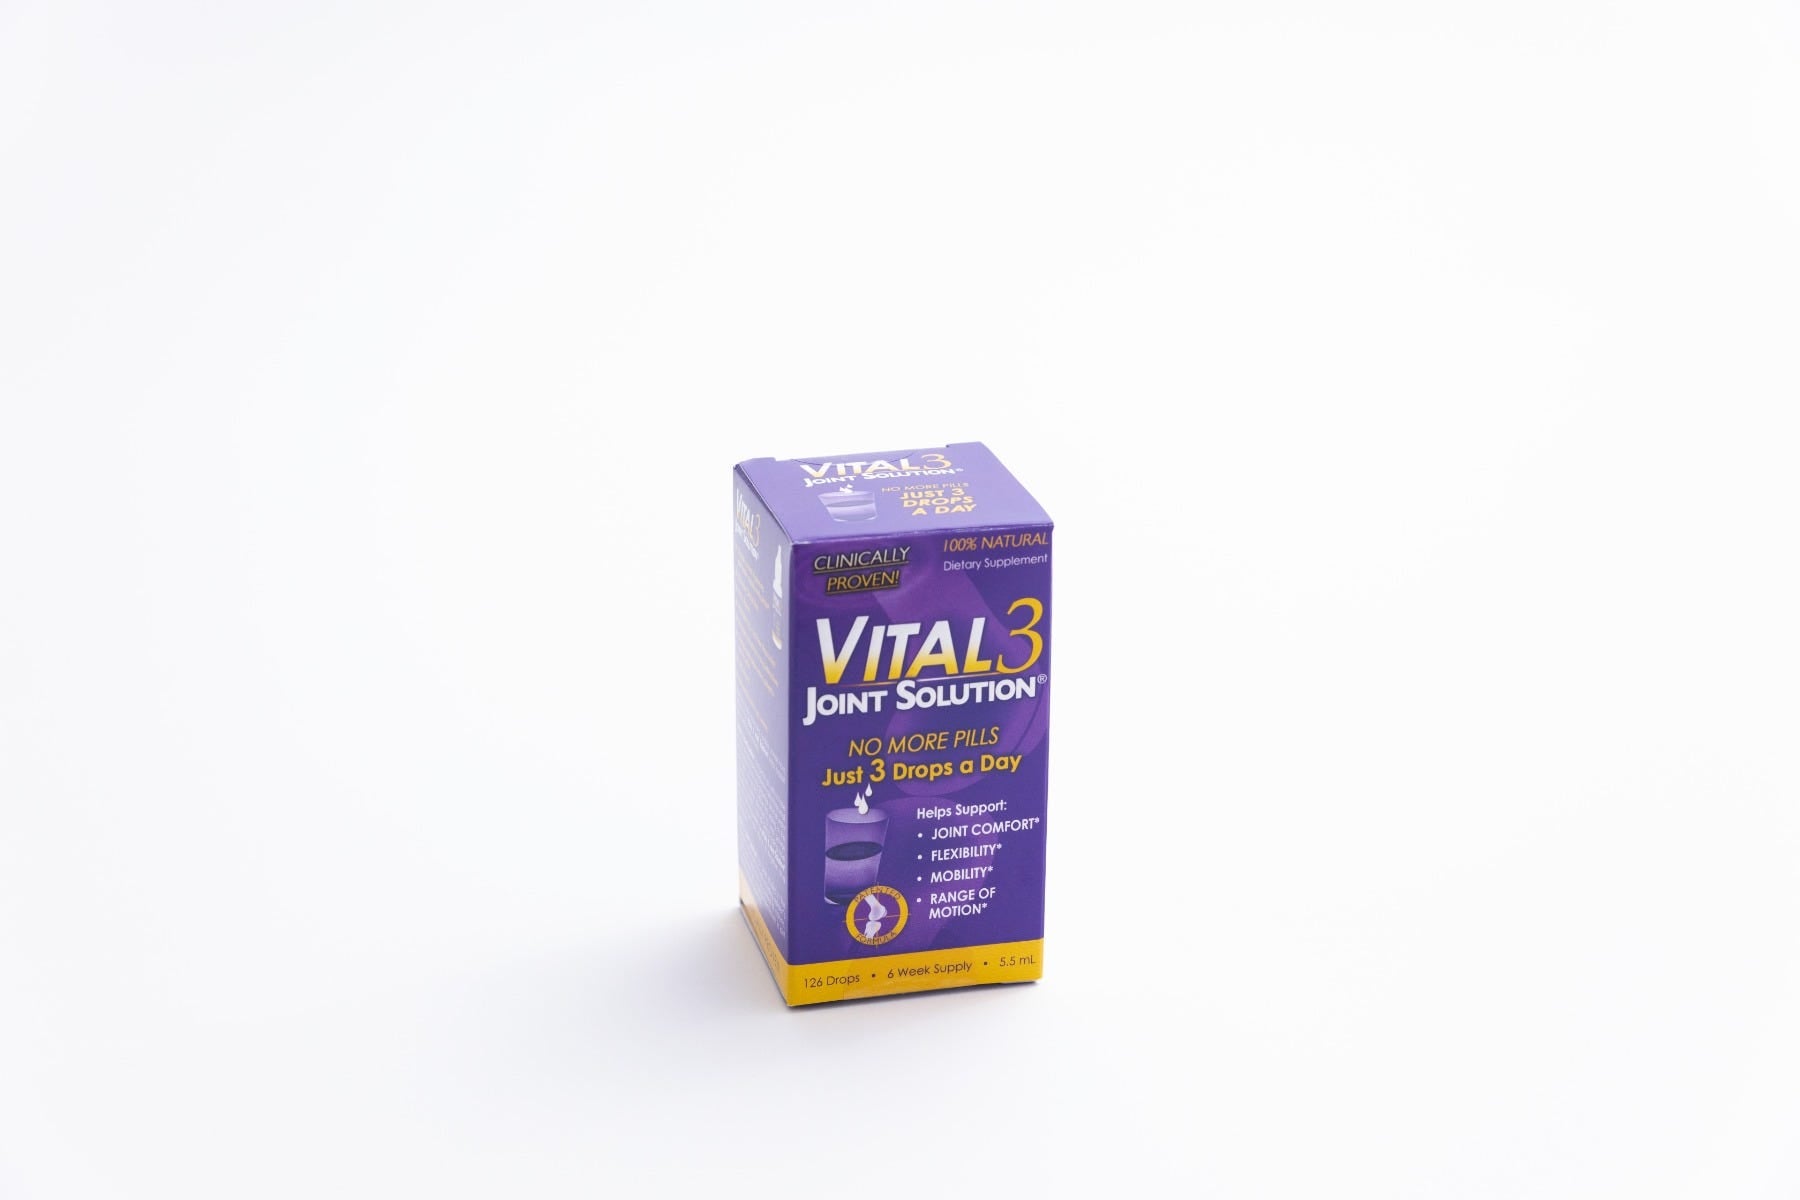 Vital3 Joint Solution® Liquid Clinically Proven - 5.5 mL view 8 of 11